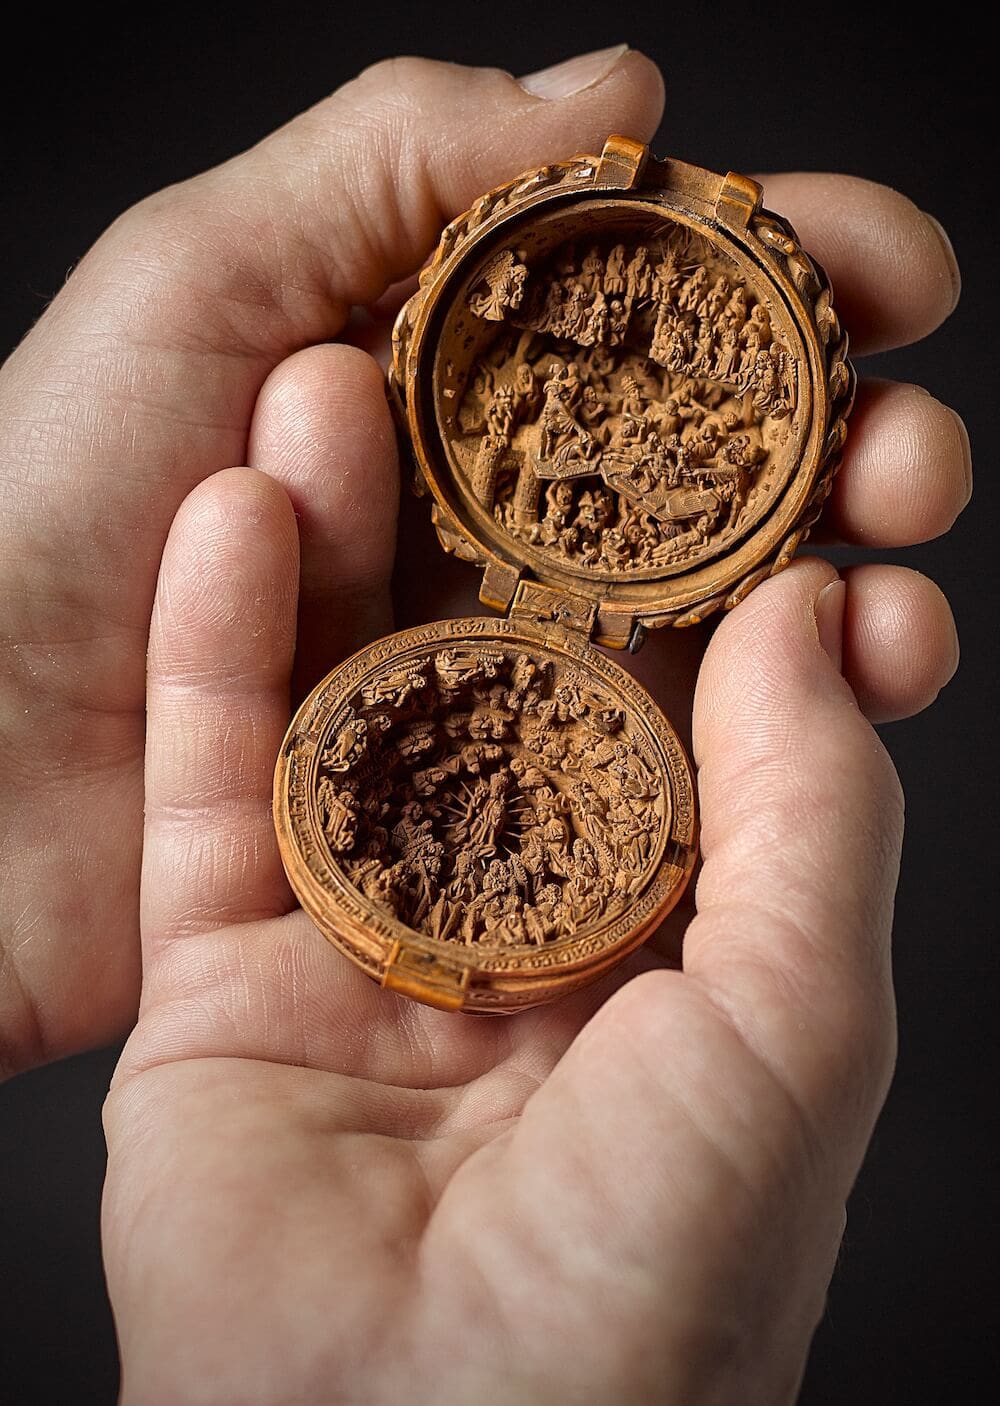 Beautifully Intricate Tiny Boxwood Carvings From The 16th Century (5)